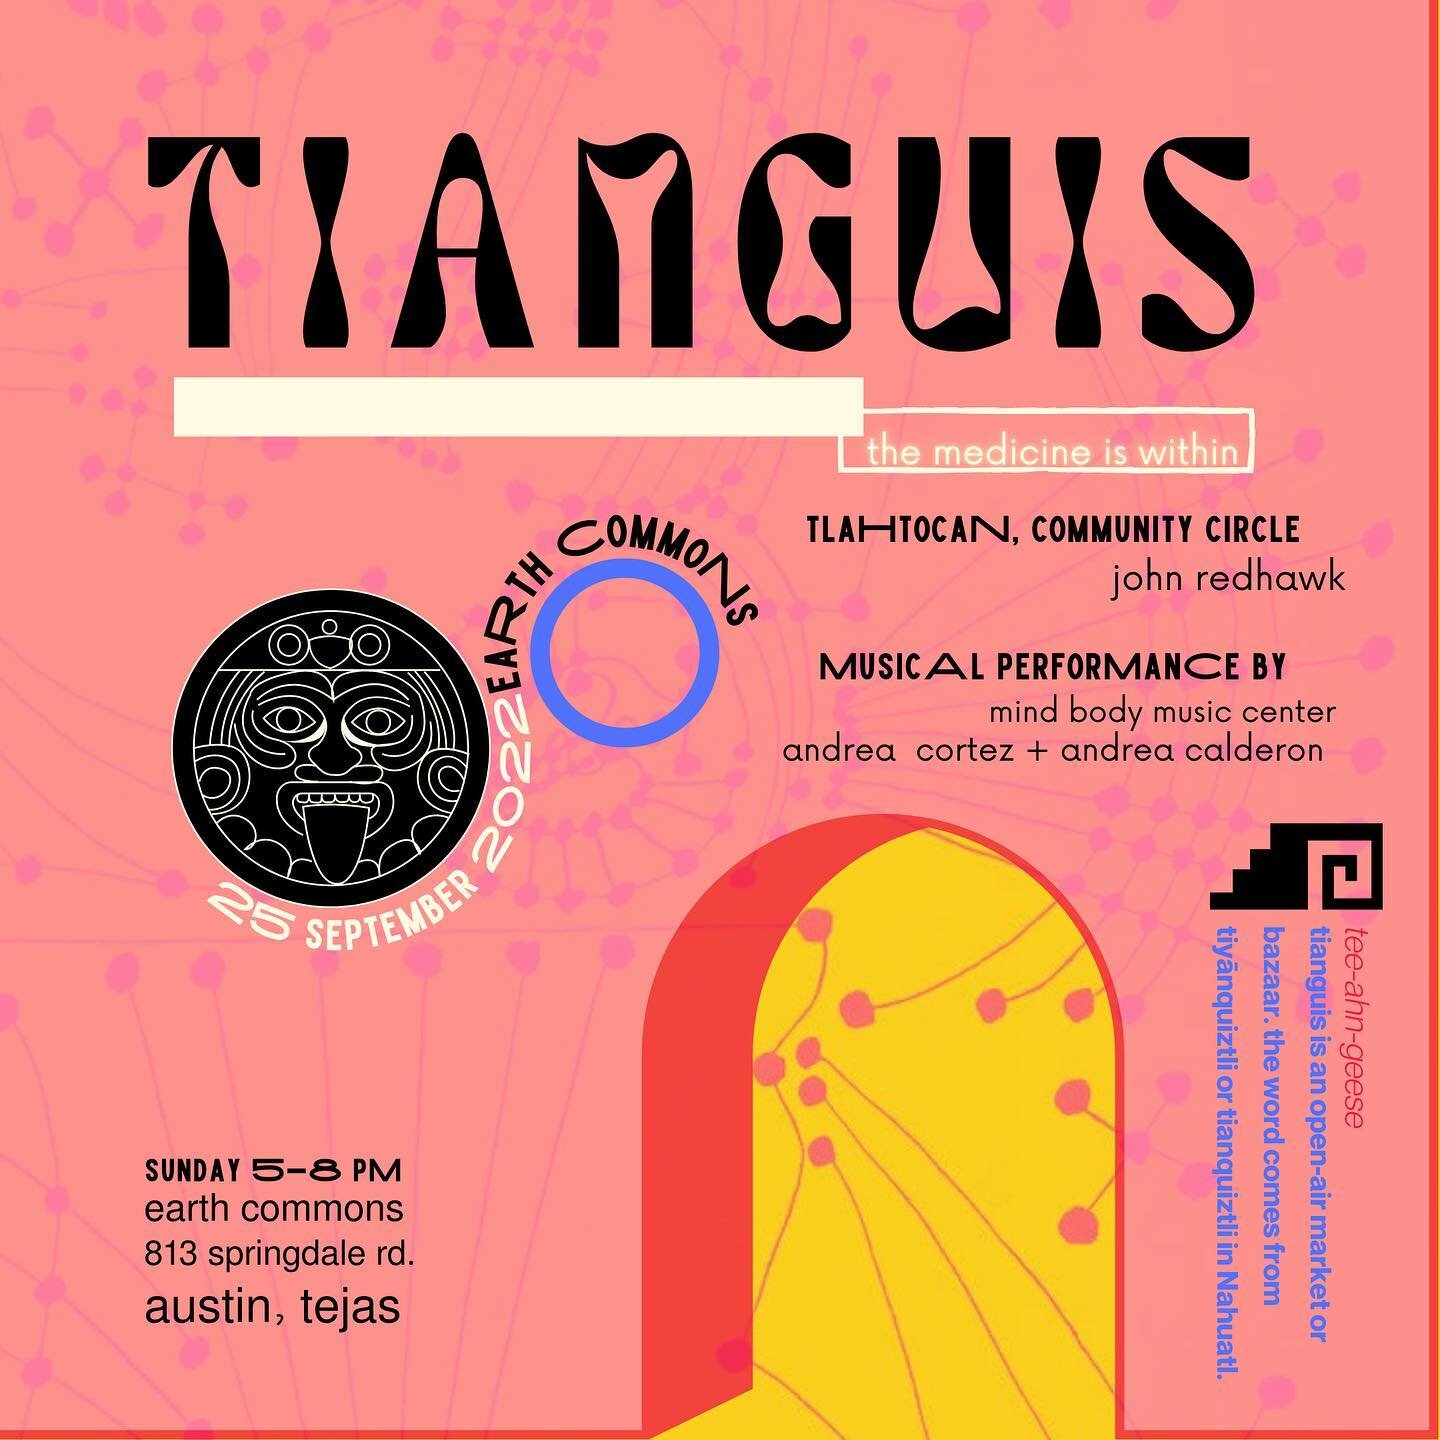 &iexcl; ayo ! mark your calendarios because TIANGUIS is back at @earthcommons on 25/SEP, 5-8PM. Our theme is &quot;the medicine is within&quot;, true to the ethos of earthcommons and @ritual_union_ @corazonverdeyerbas @santos.suerte 's specialised an